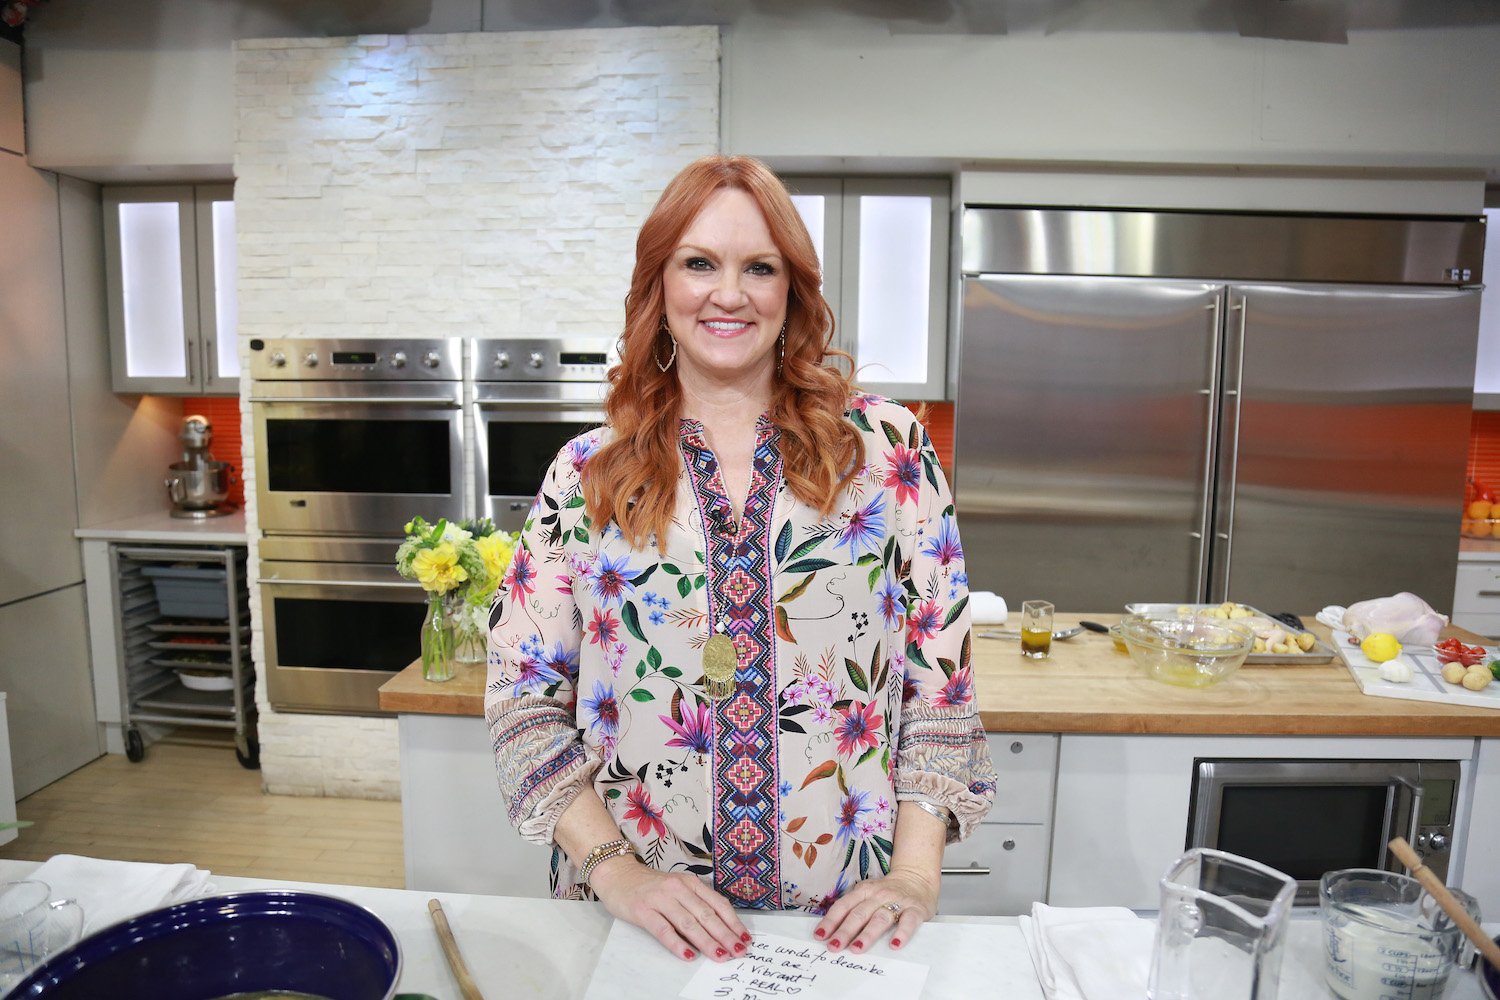 'The Pioneer Woman' star Ree Drummond wears a bright top and smiles on the set of the 'Today' show